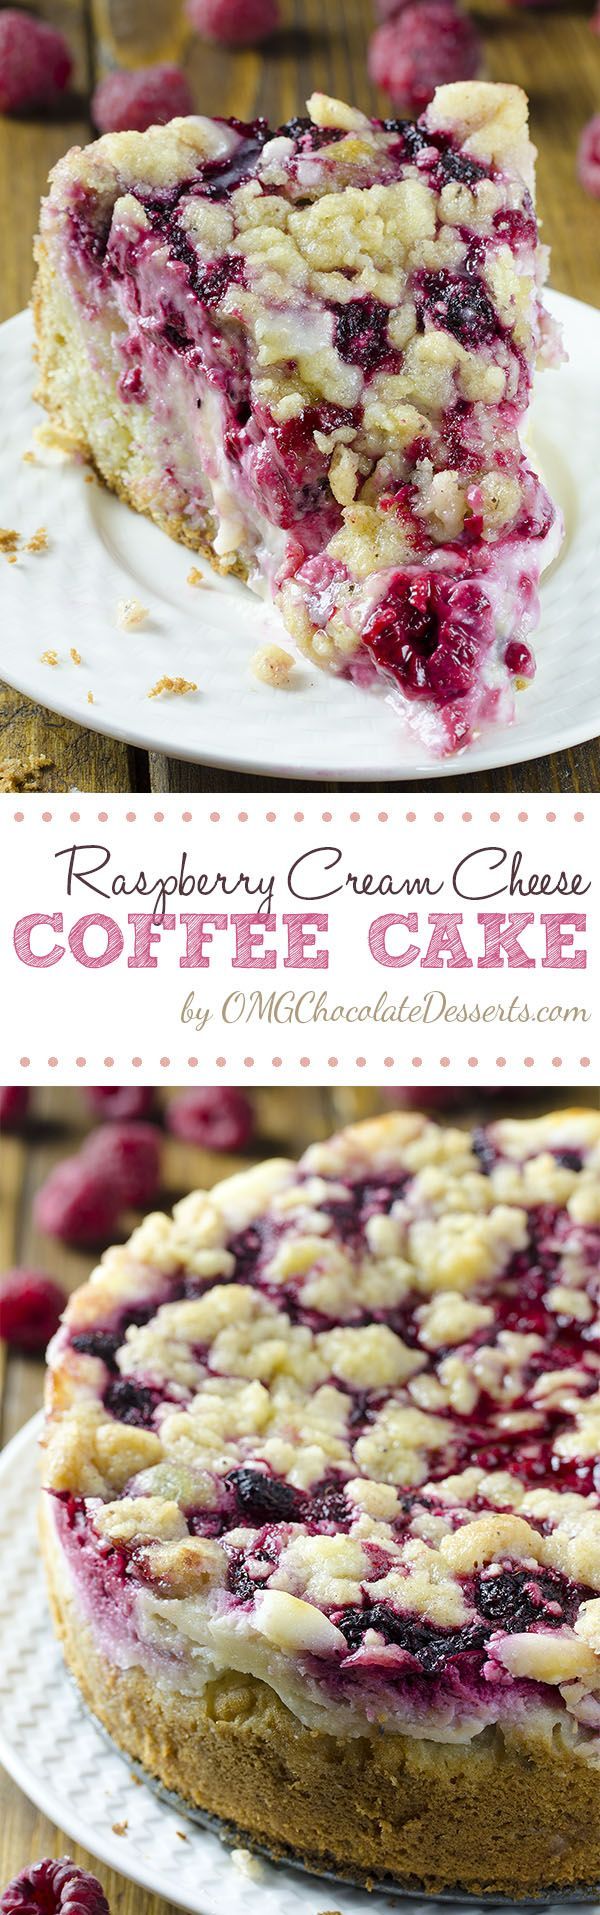 Raspberry Cream Cheese Coffee Cake – all flavors you love, you’ll get here in every bite: moist and bu